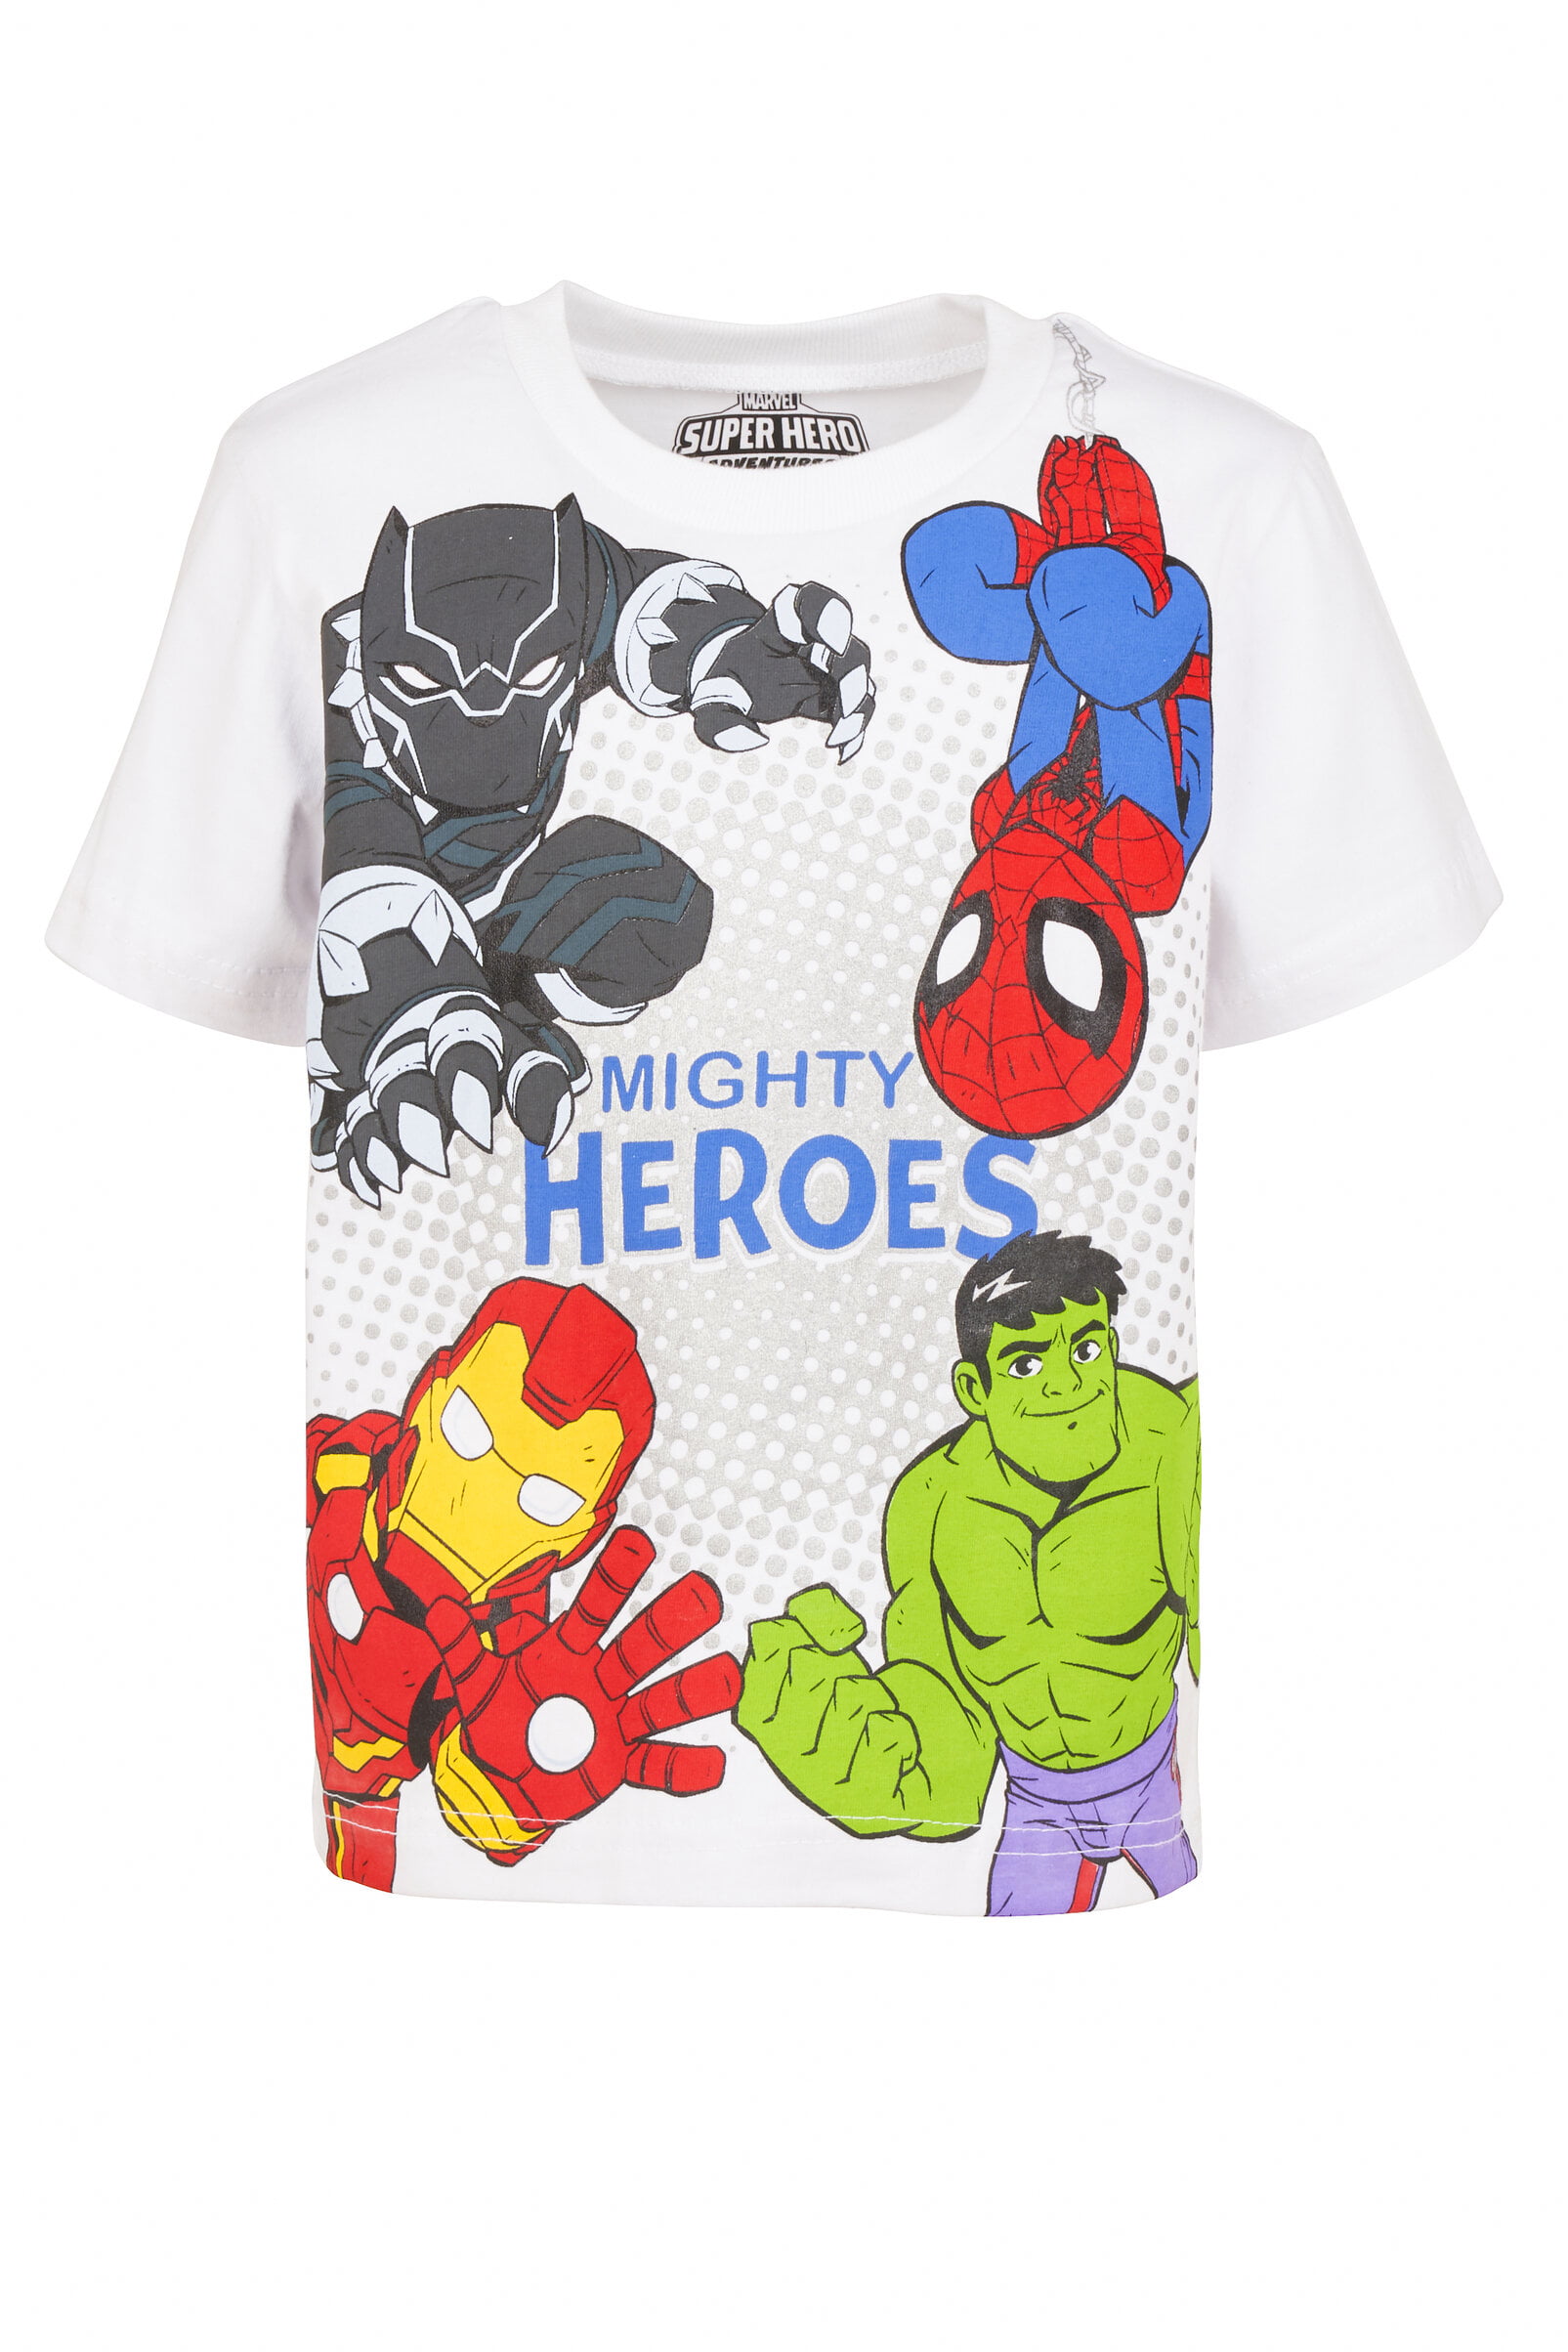 Marvel Avengers Hulk Toddler Boys T-Shirt and Mesh Shorts Outfit Set Toddler  to Little Kid